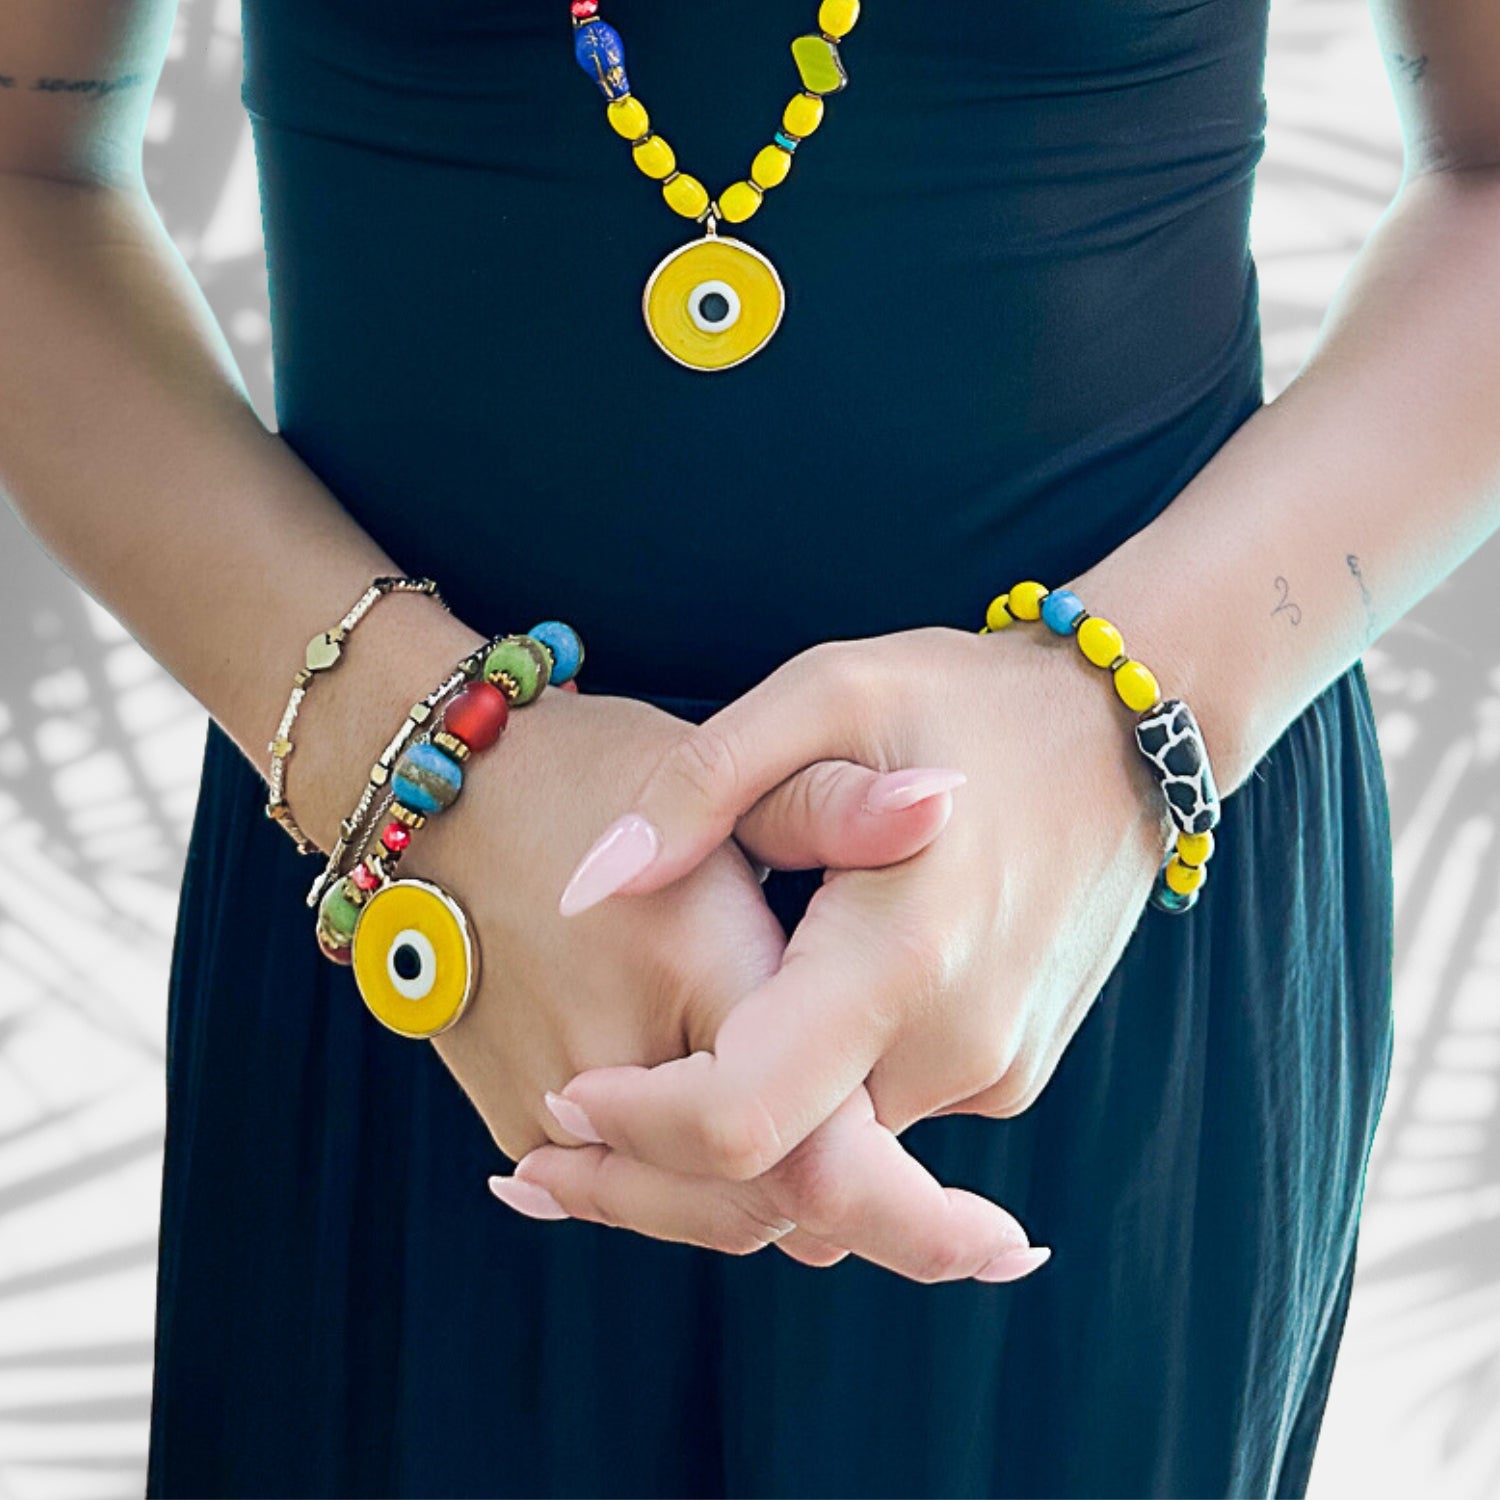 An image of a hand model wearing the Happiness Symbol Yellow Bracelet, showcasing how it adds a vibrant and meaningful touch to the wrist, creating a stylish and uplifting accessory.